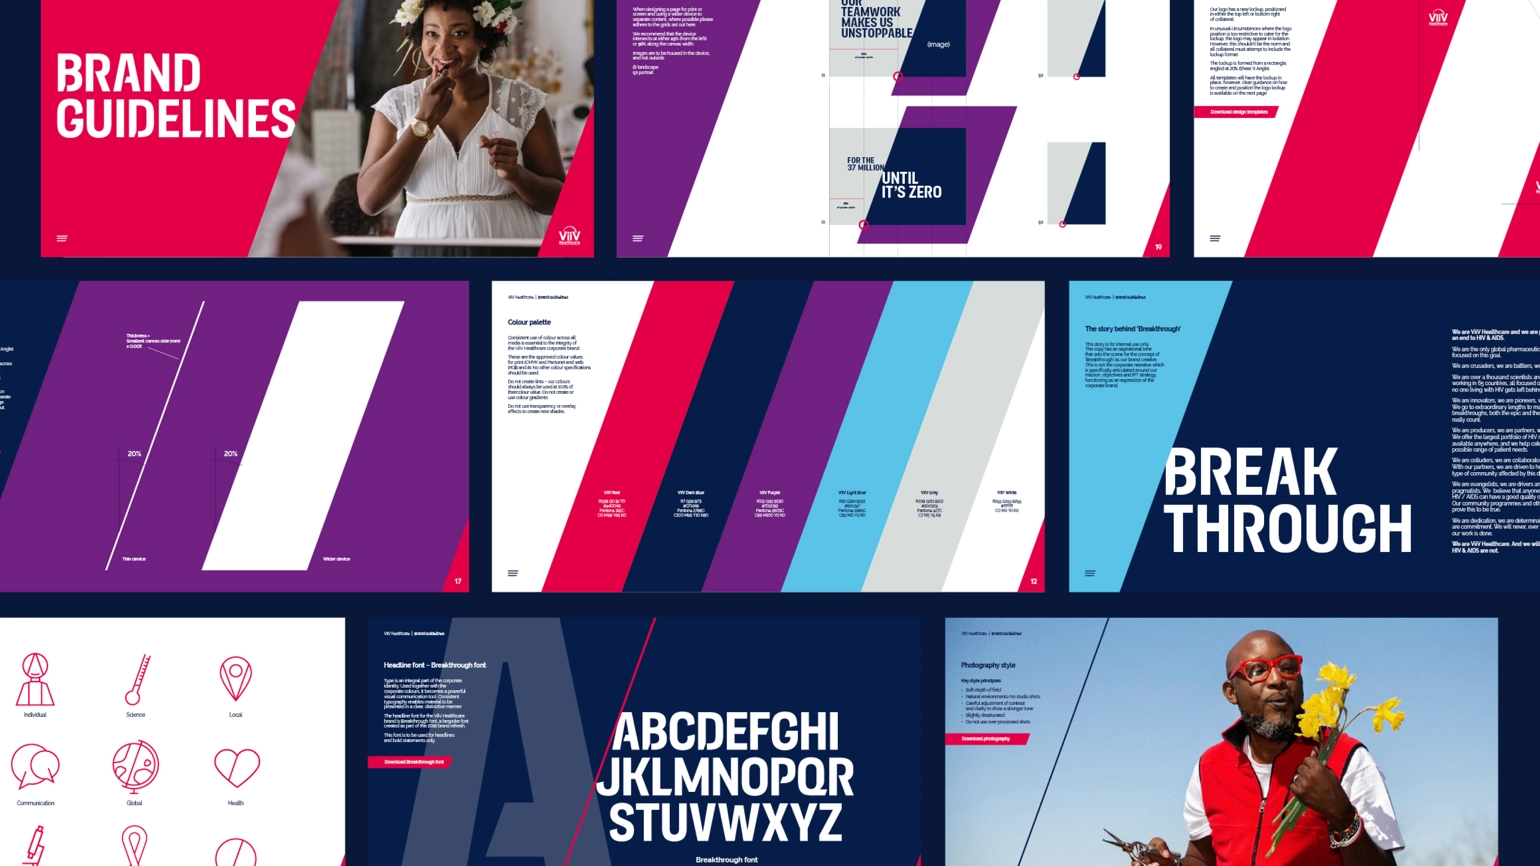 the brand guidelines of the campaign with icon, colour and font